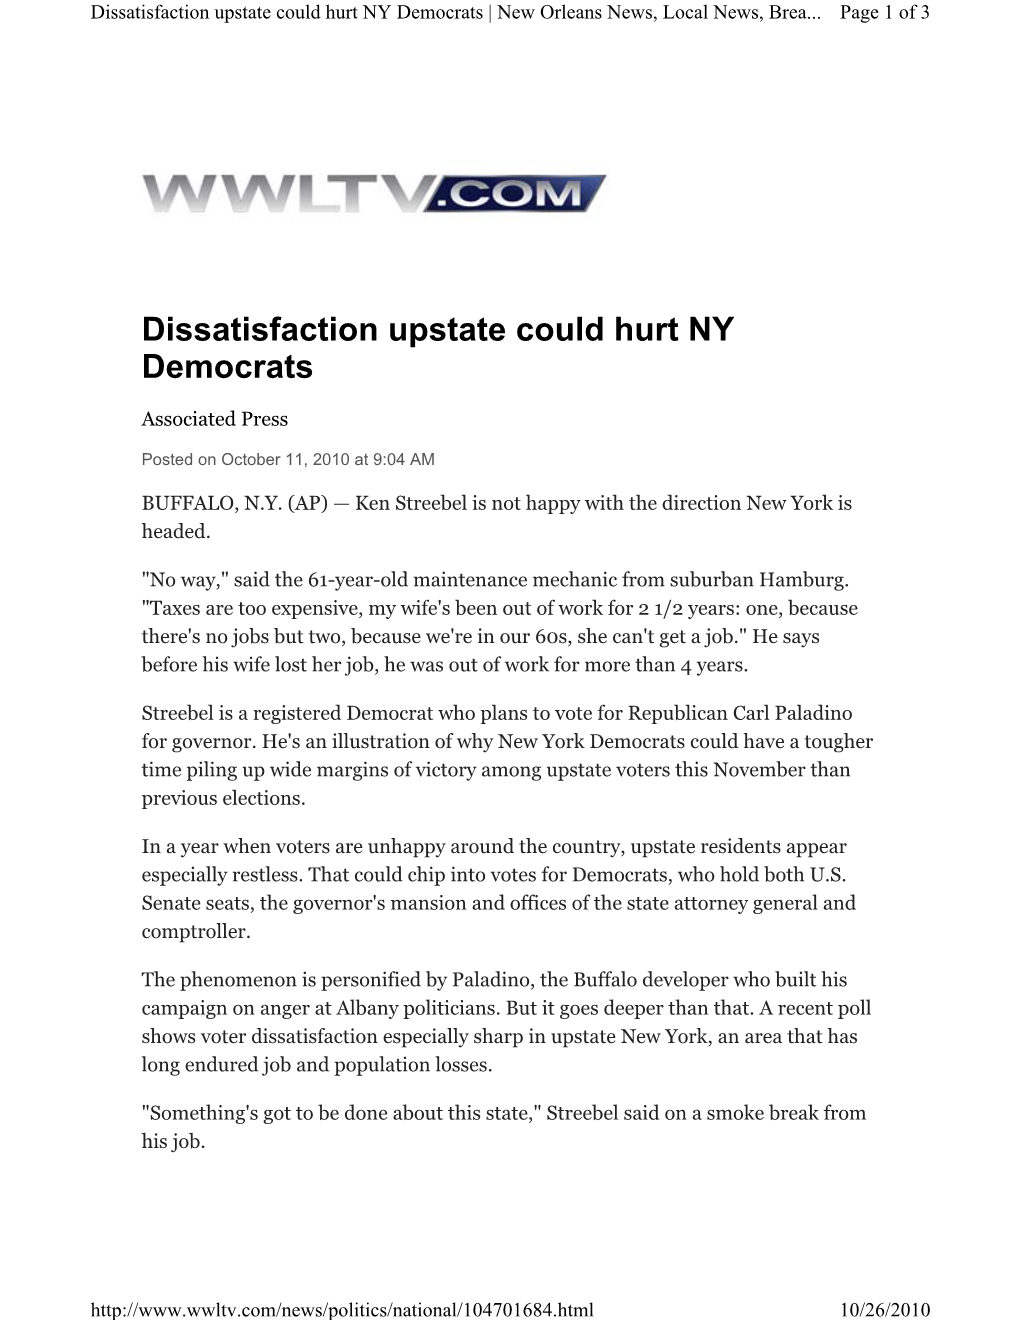 Dissatisfaction Upstate Could Hurt NY Democrats | New Orleans News, Local News, Brea